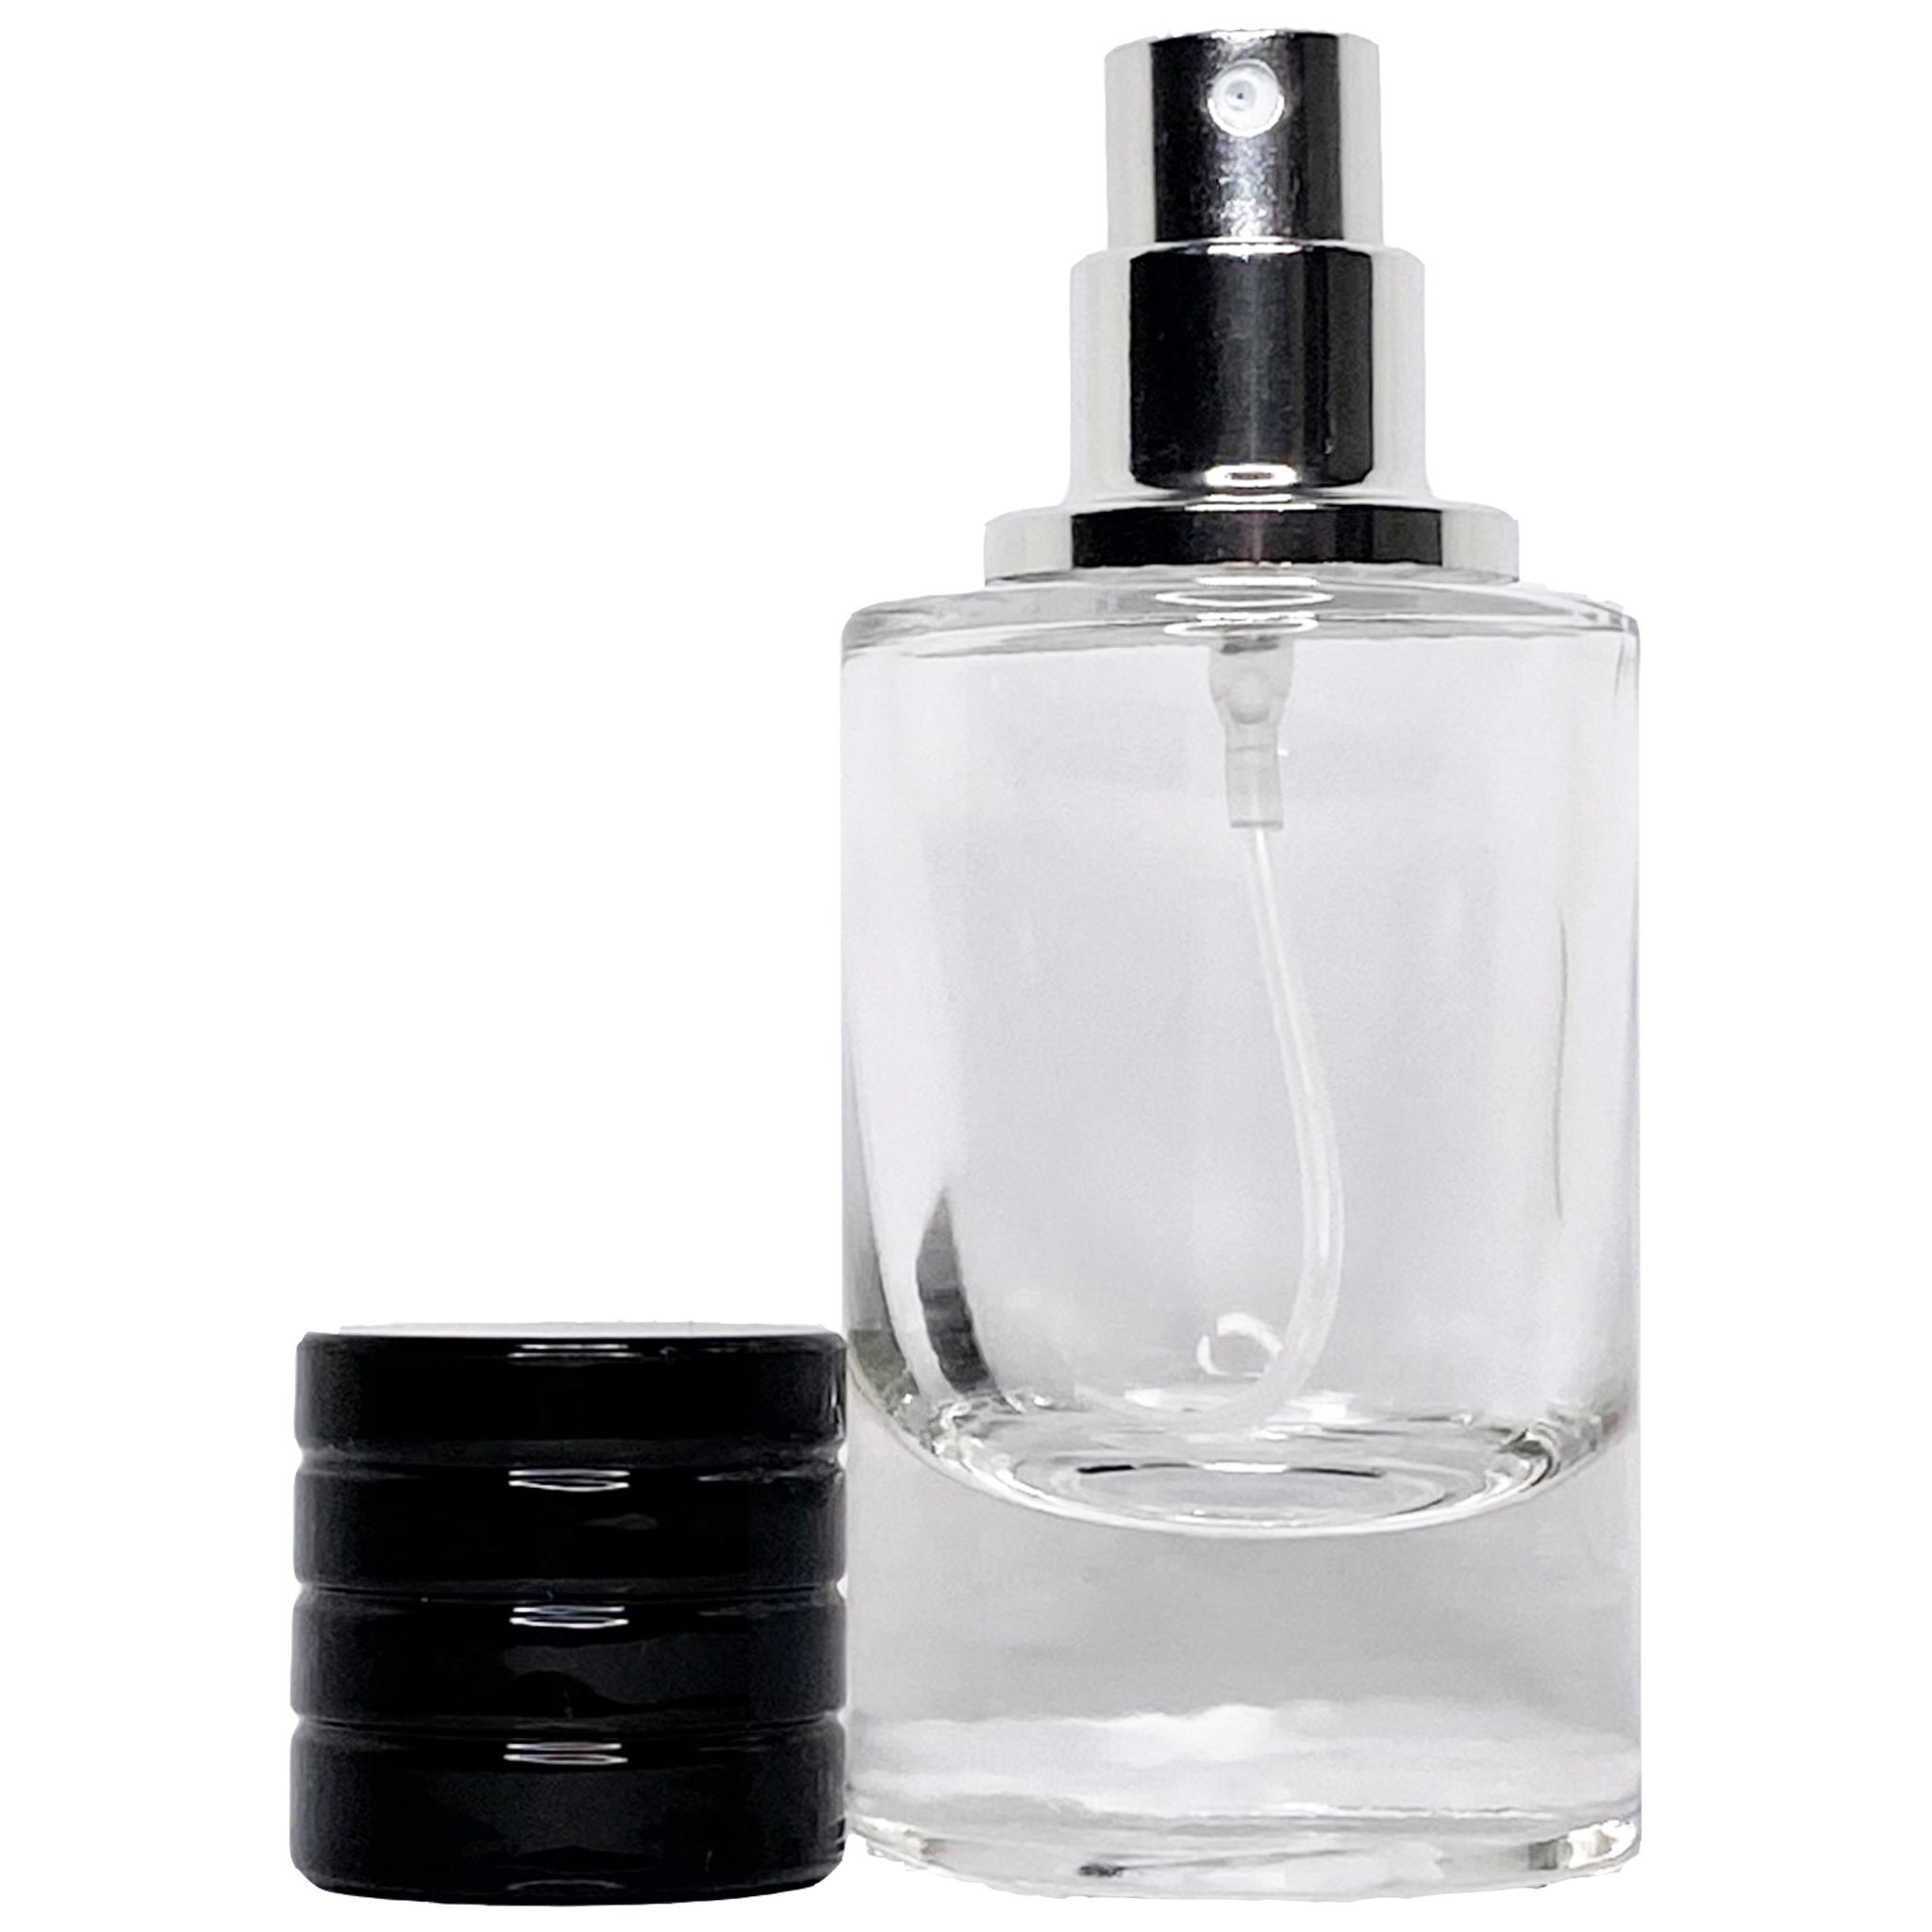 SYBiTeng 6 Pack 30ml / 1 oz. Black Refillable Perfume Bottle, Portable  Square Empty Glass Perfume At…See more SYBiTeng 6 Pack 30ml / 1 oz. Black